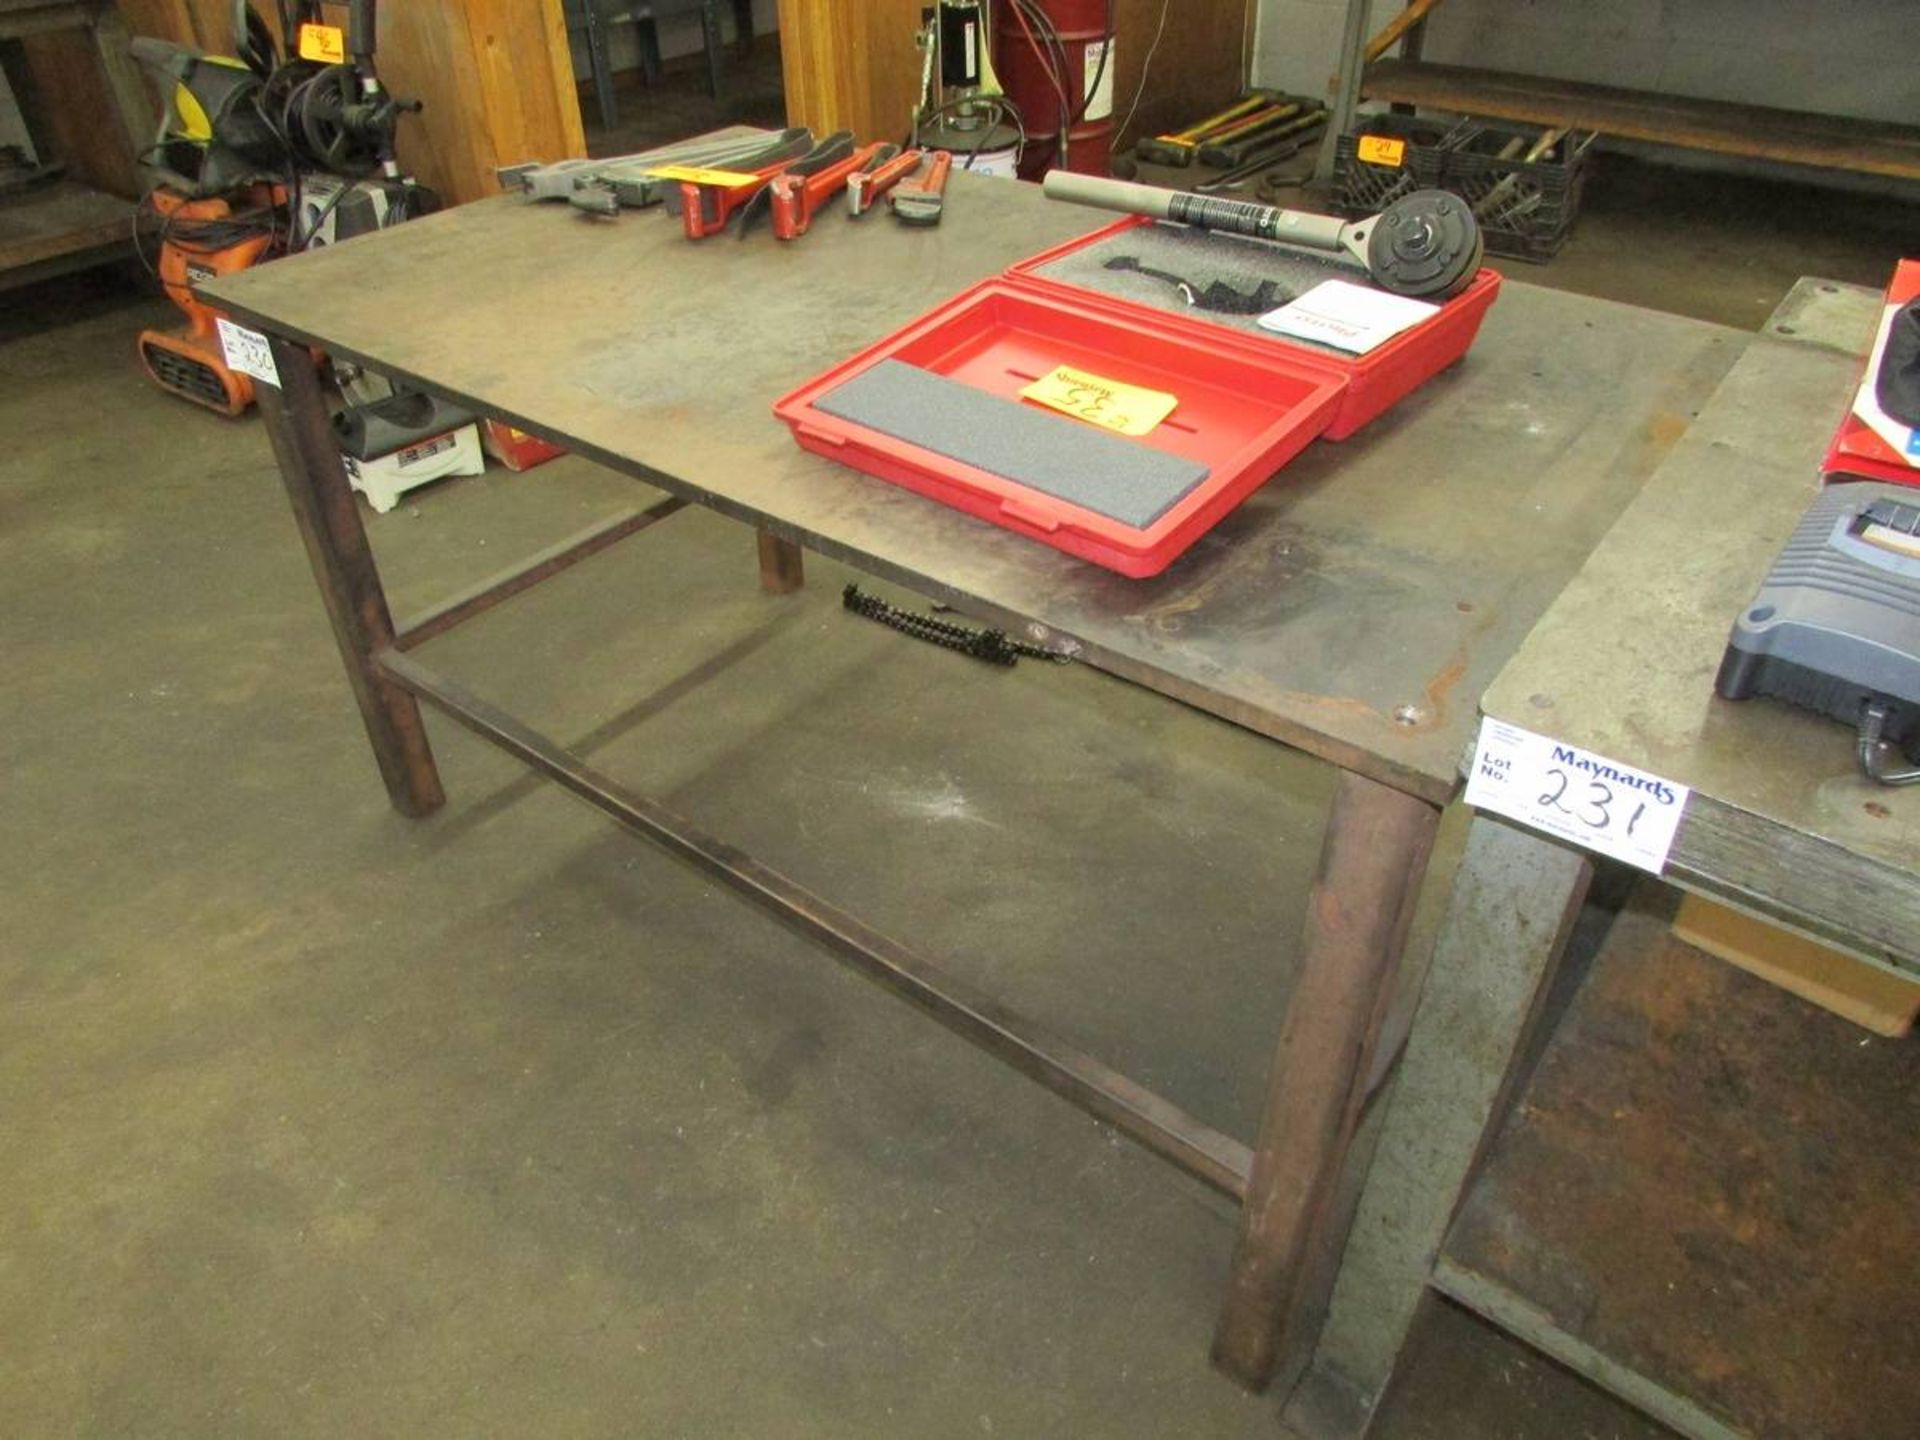 5'x3' Steel Top Fabrication Table - Image 2 of 2